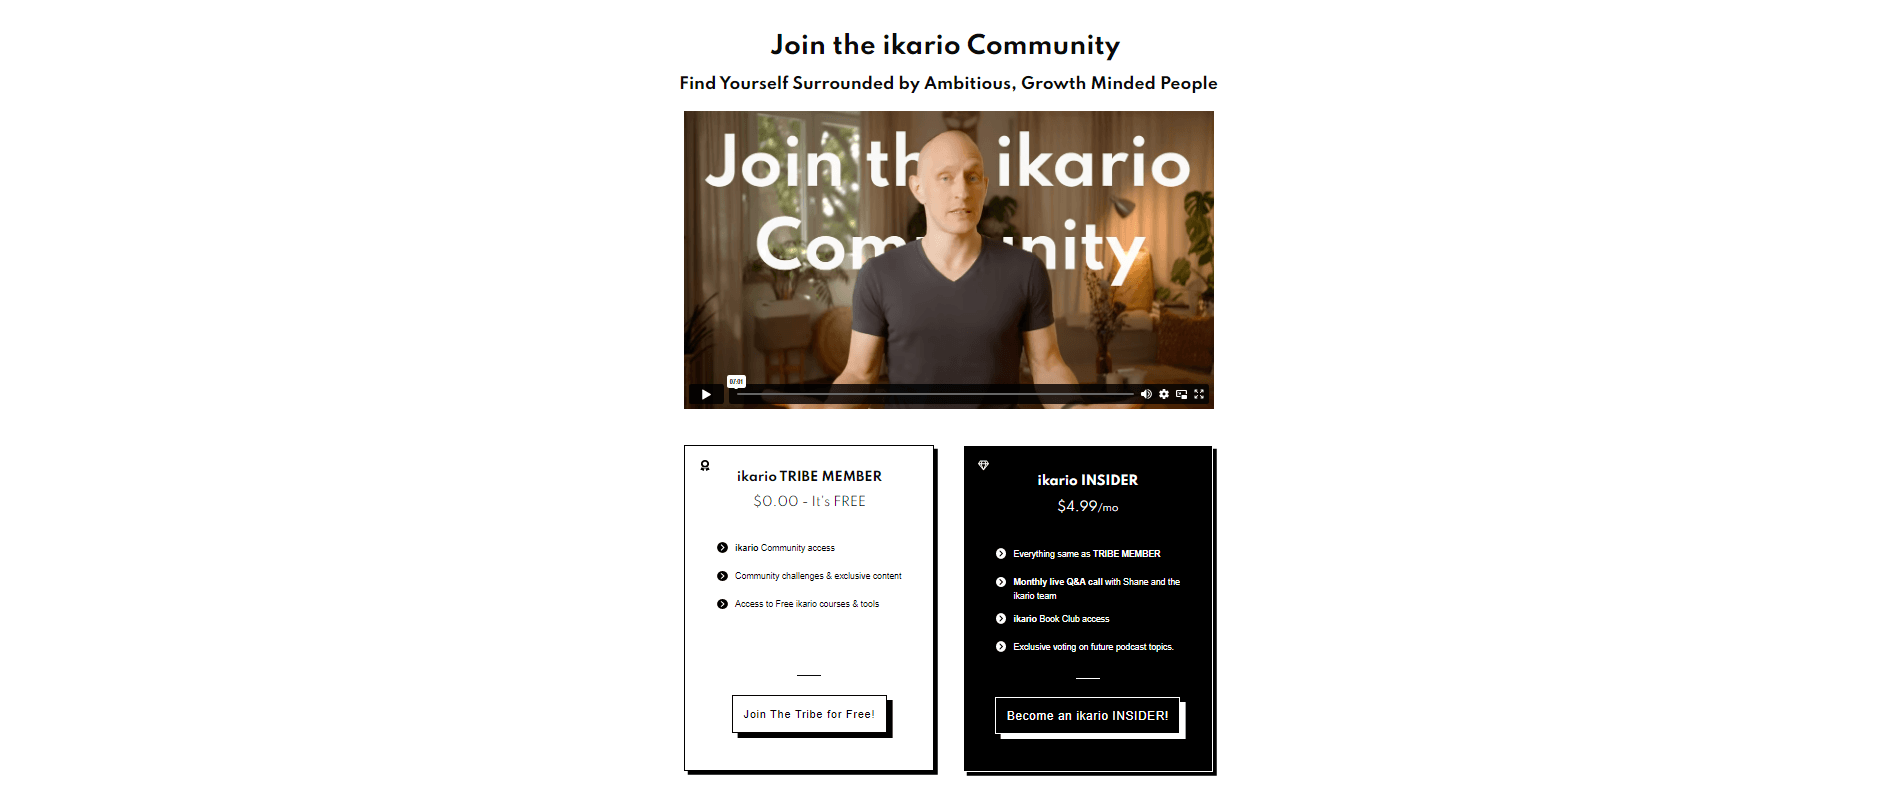 Snapshot of offer to join the Ikario community for free or for $4.